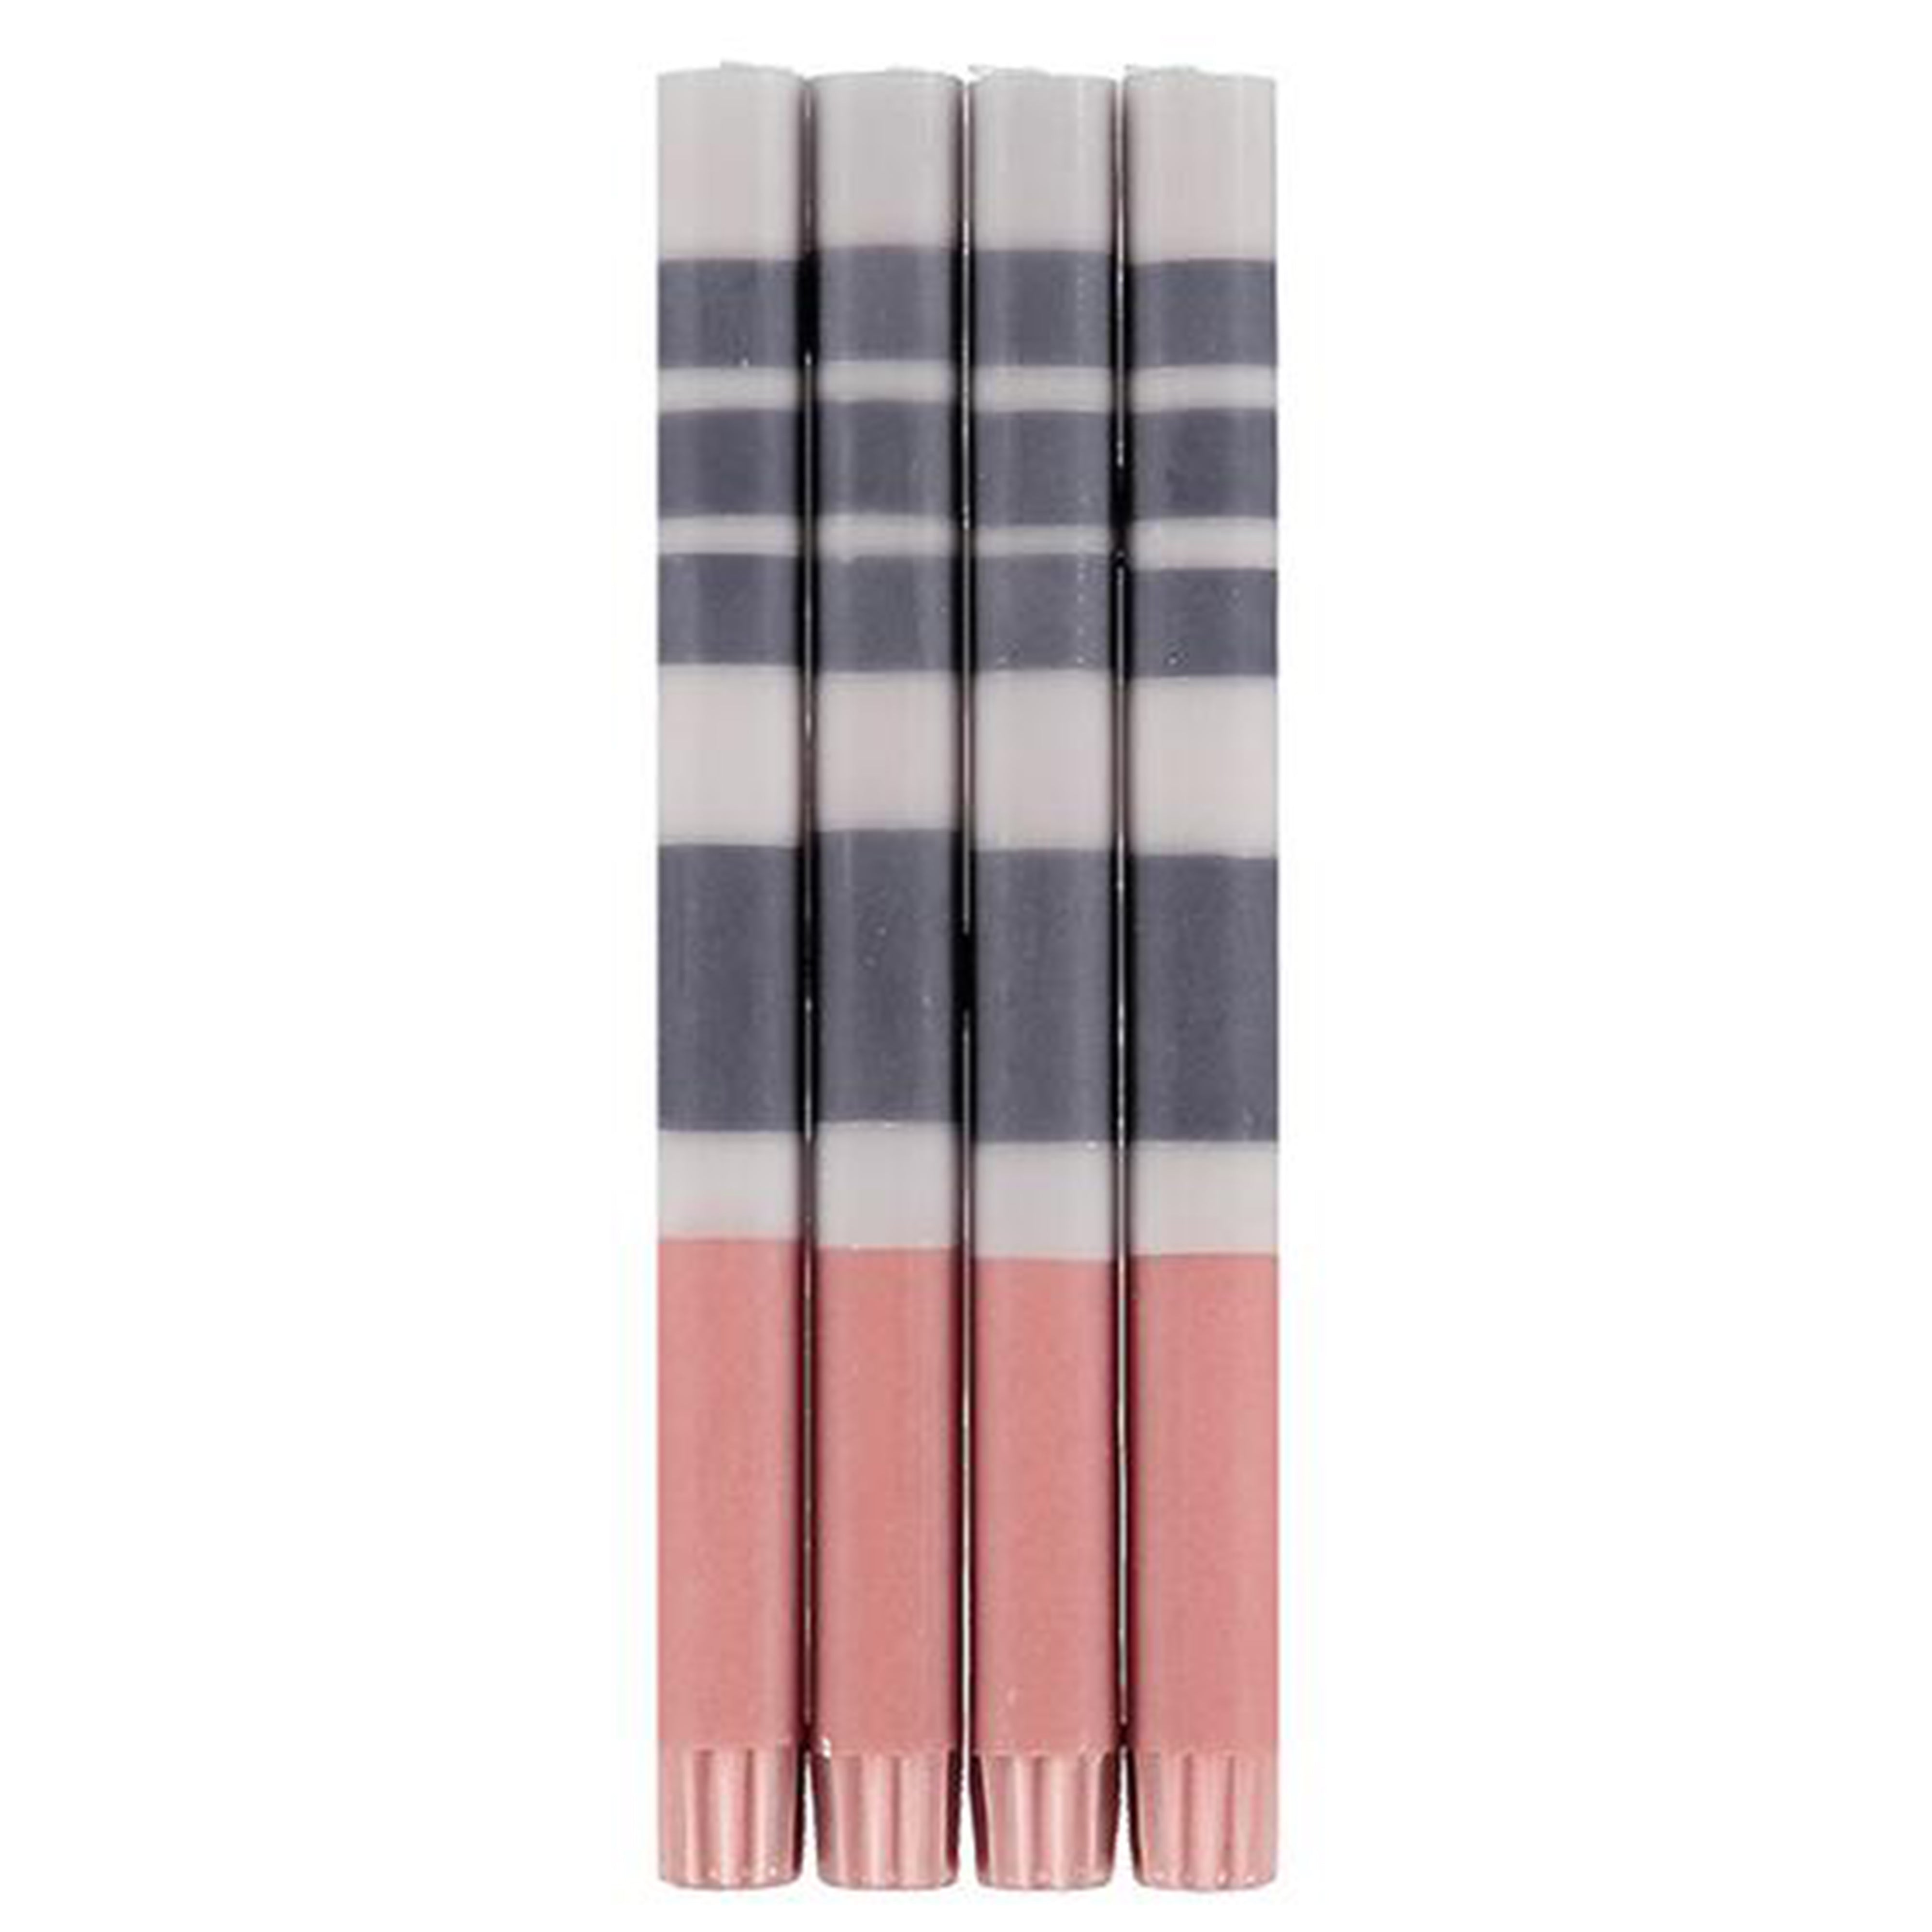 STRIPED GULL, GUNMETAL GREY & OLD ROSE ECO DINNER CANDLES